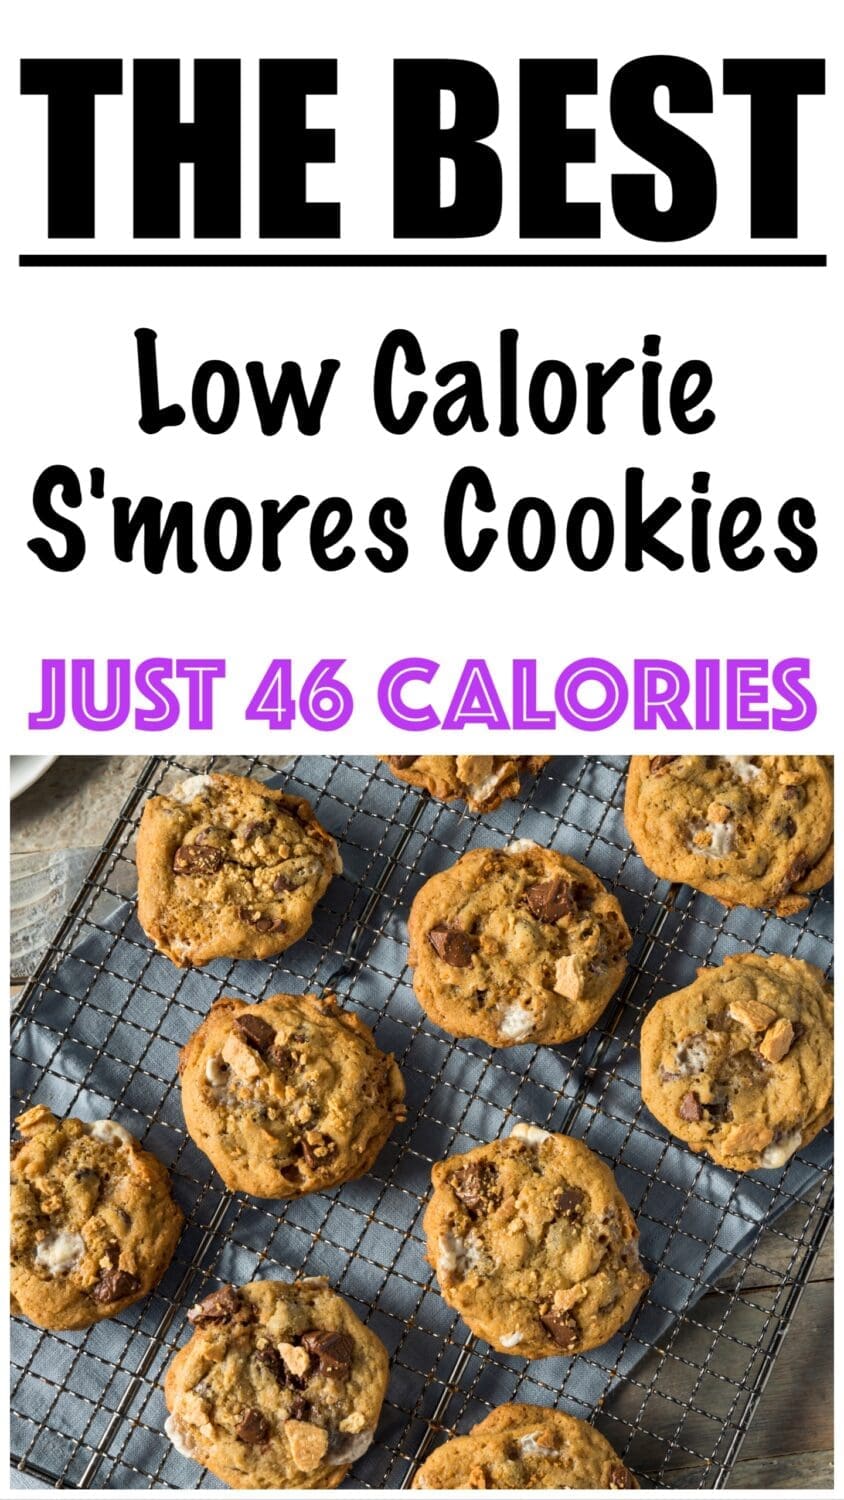 Low Calorie S'mores Cookies